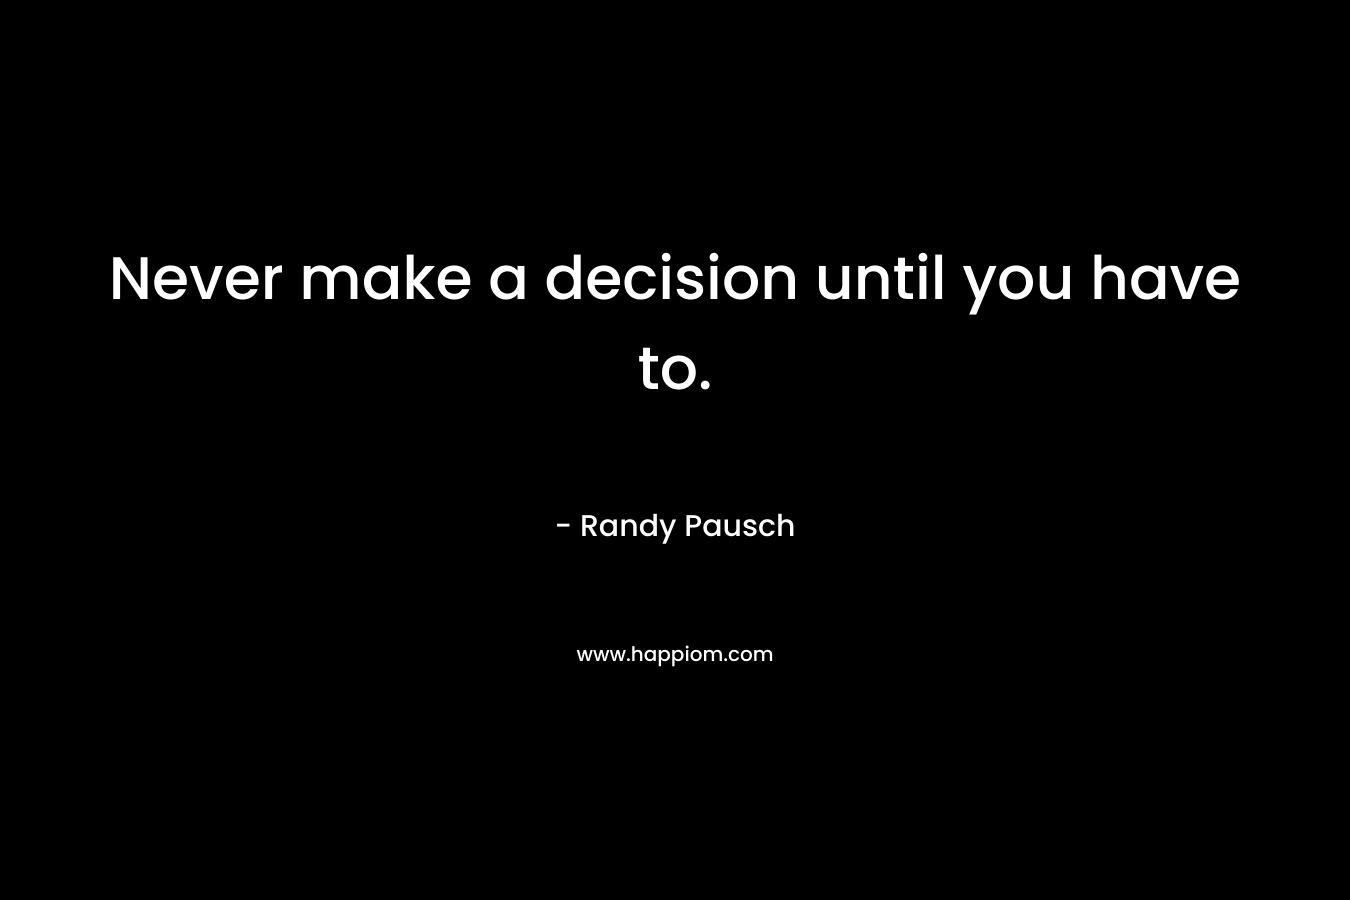 Never make a decision until you have to. – Randy Pausch